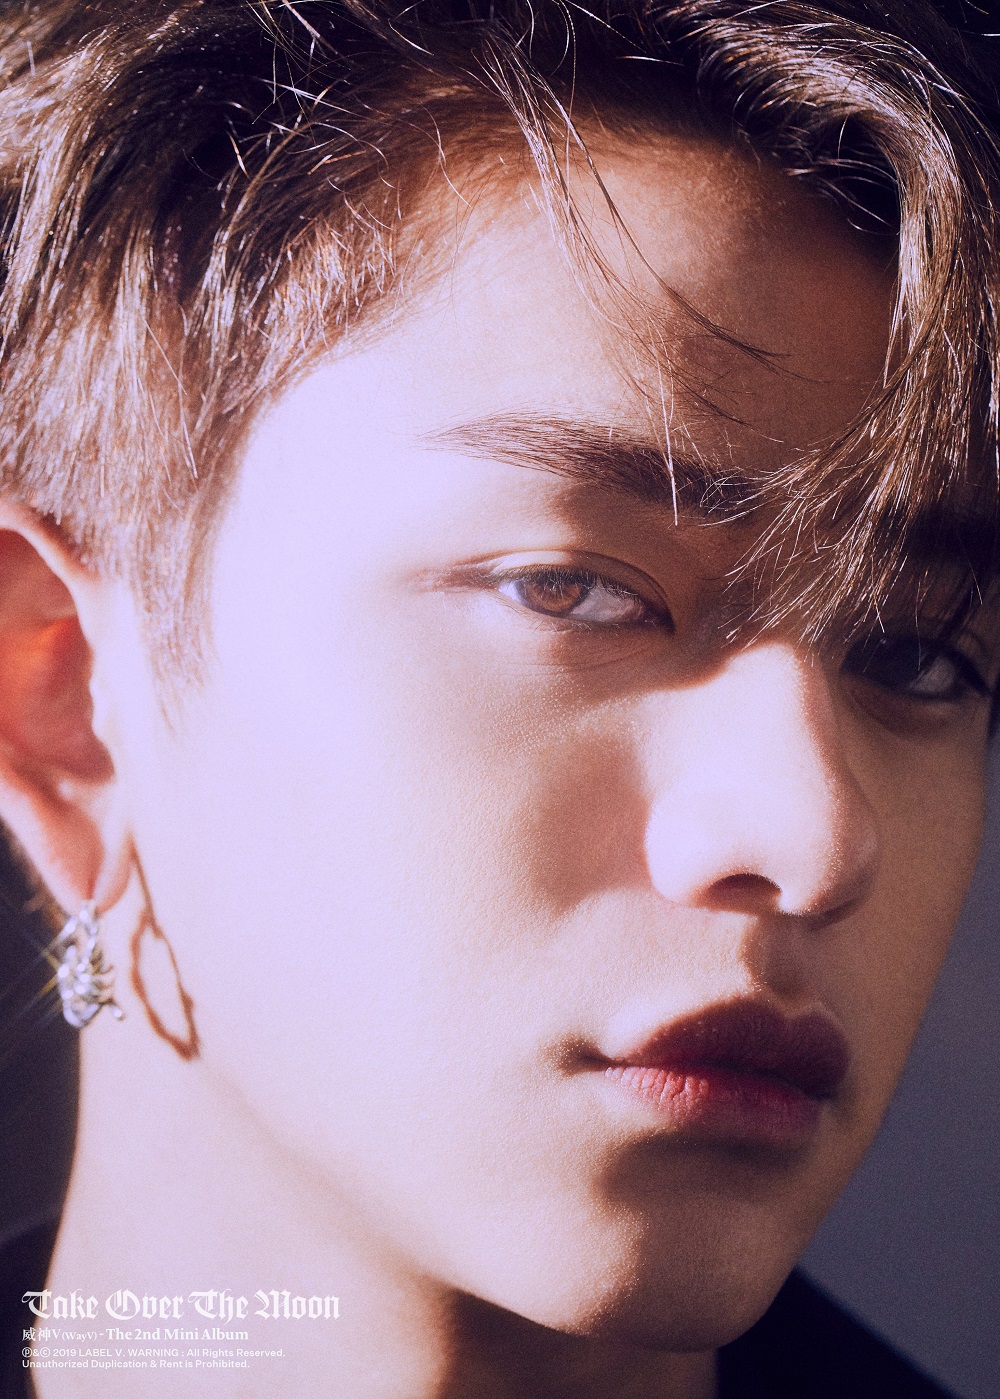 WayV Releases a Cool Teaser Ahead of The Comeback 'Take Over the Moon'